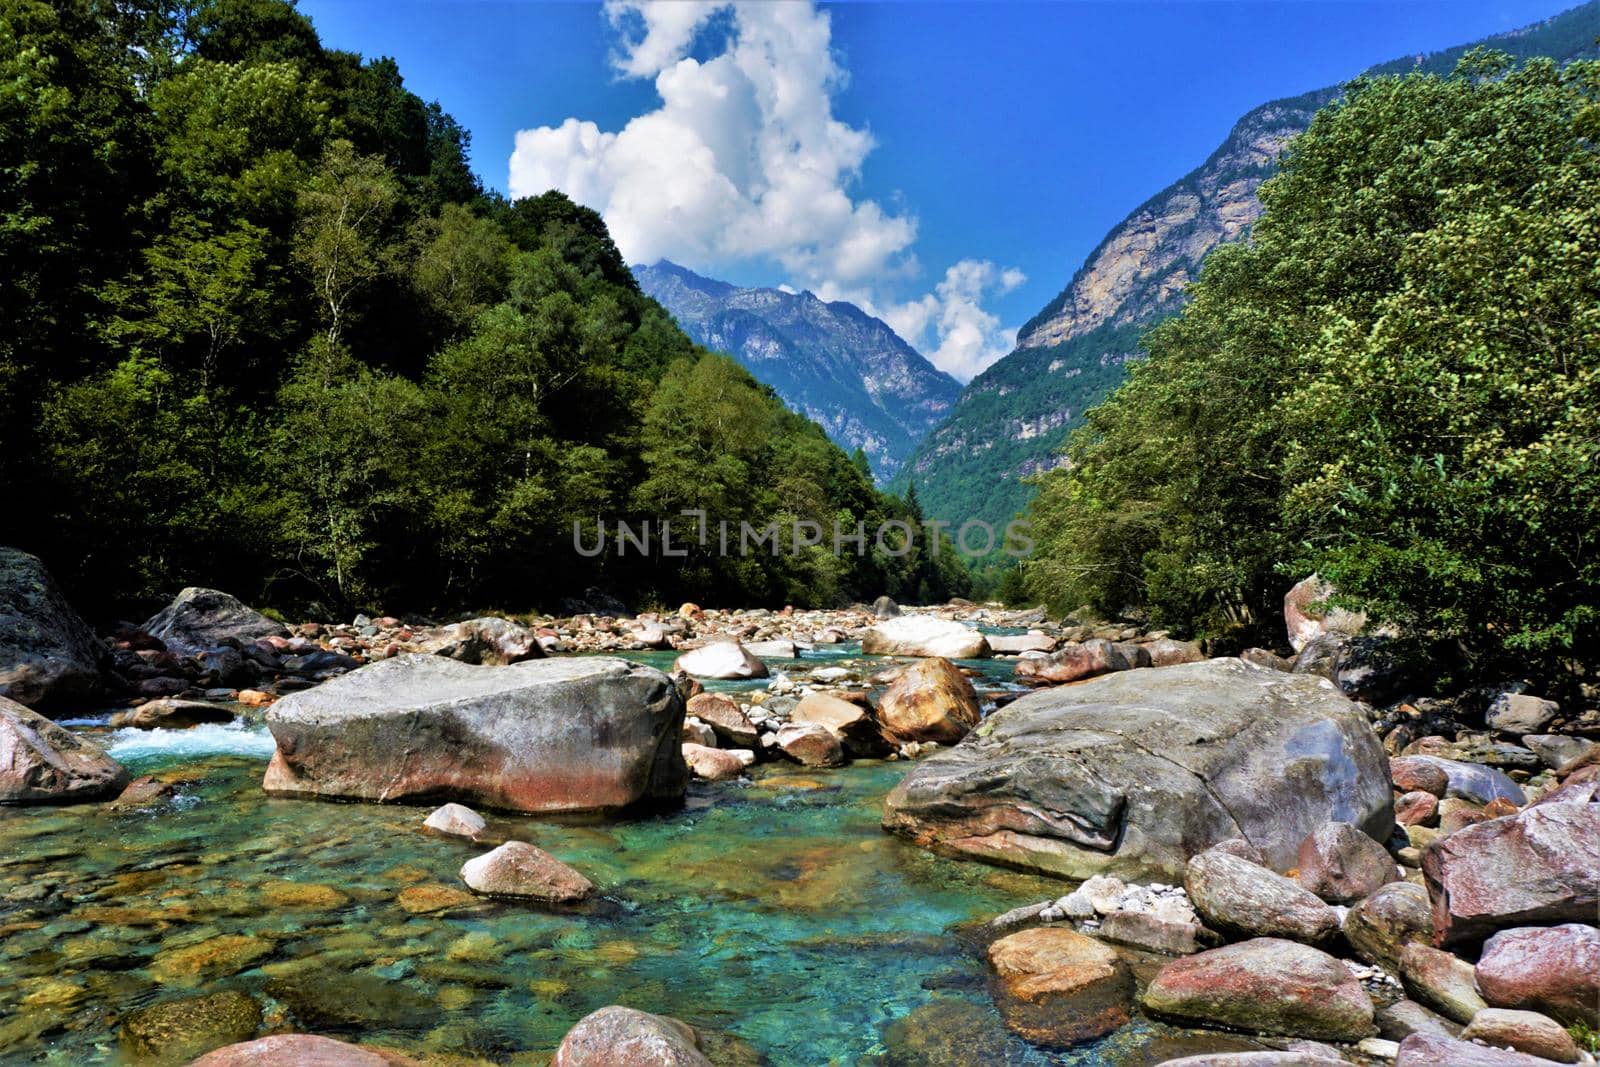 Big rocks in the Verzasca river and beautiful landscape of Ticino, Switzerland by pisces2386